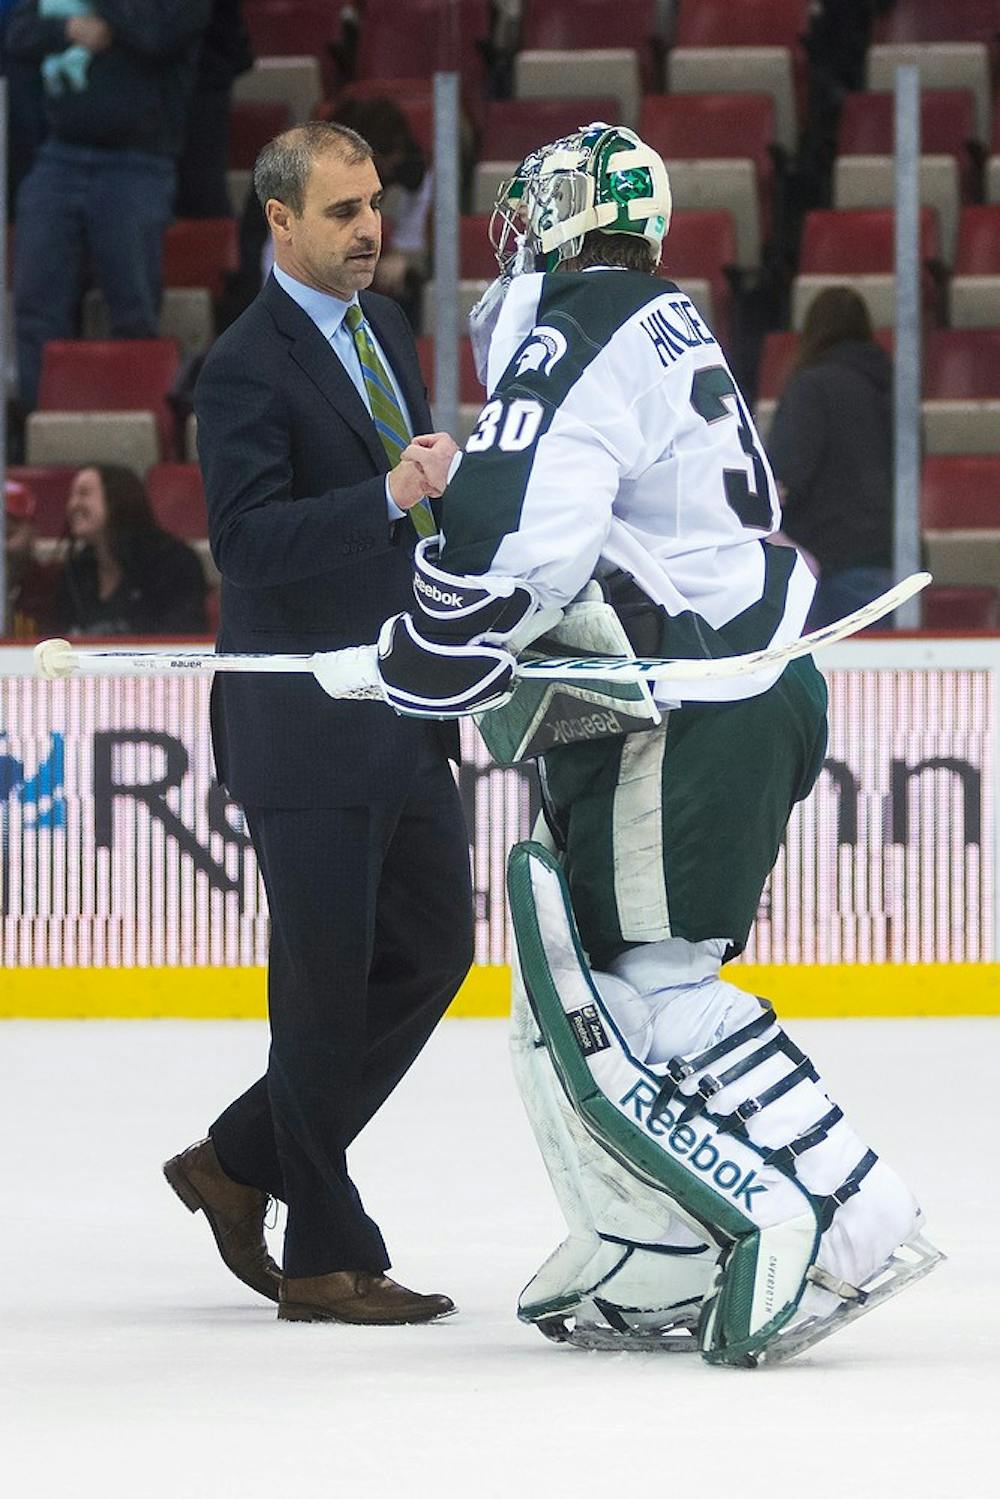 <p>Head coach Tom Anastos bumps fists with junior goaltender Jake Hildebrand following a win against Ferris State on Dec. 28, 2014, during the 50th Great Lakes Invitational at Joe Louis Arena in Detroit. Hildebrand stopped 31 shots, his first season shutout. Danyelle Morrow/The State News</p>